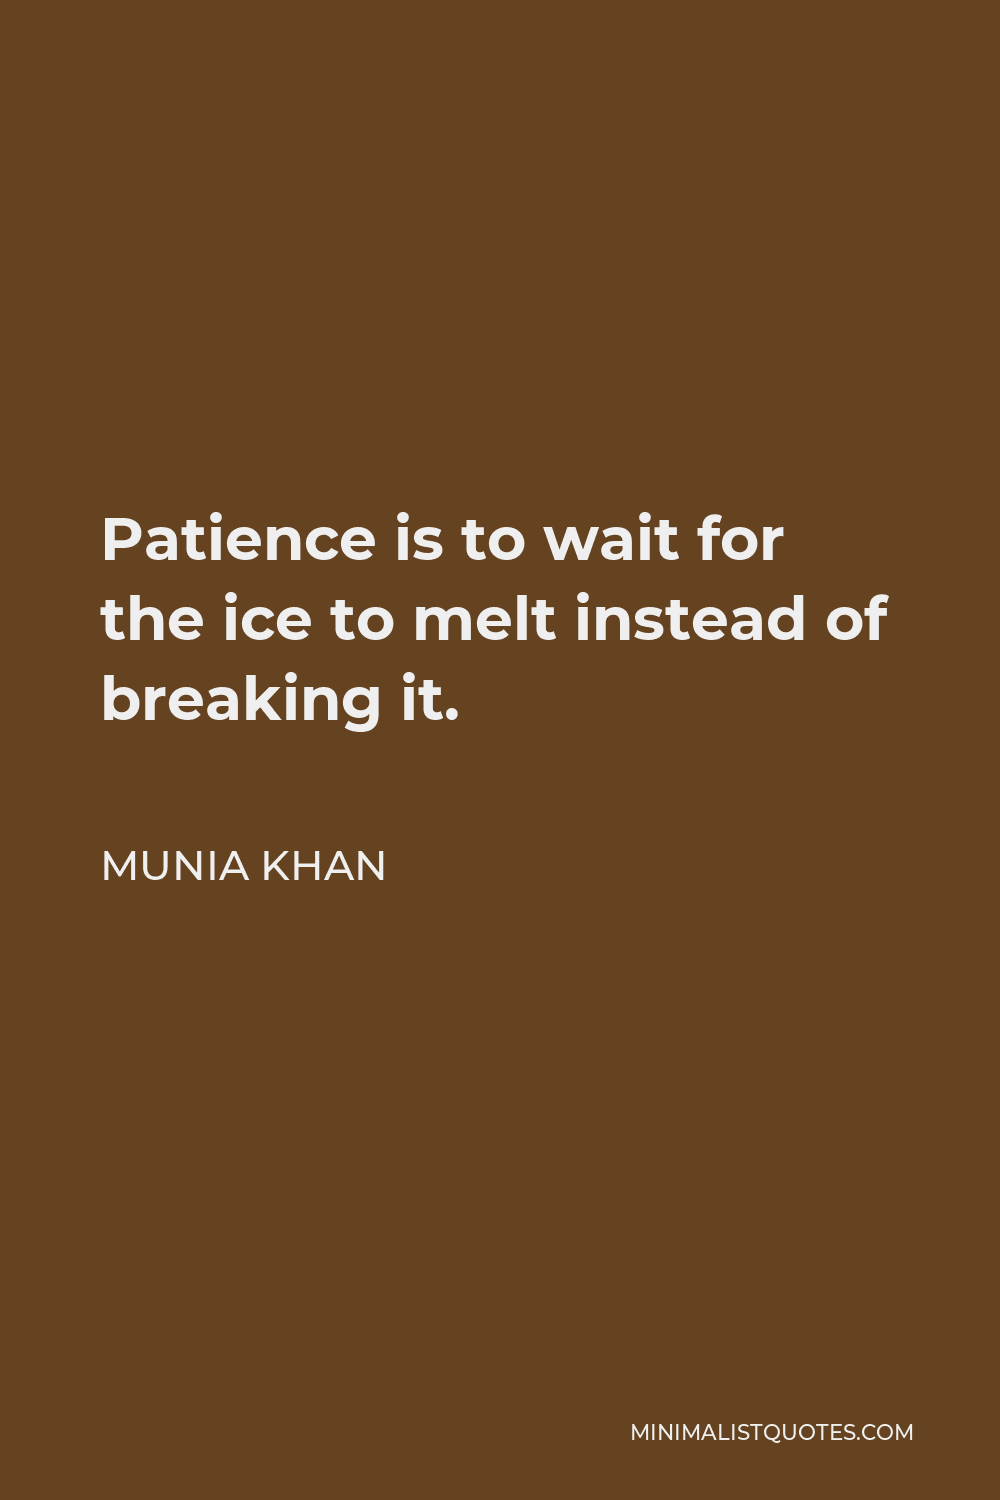 Munia Khan Quote - Patience is to wait for the ice to melt instead of breaking it.